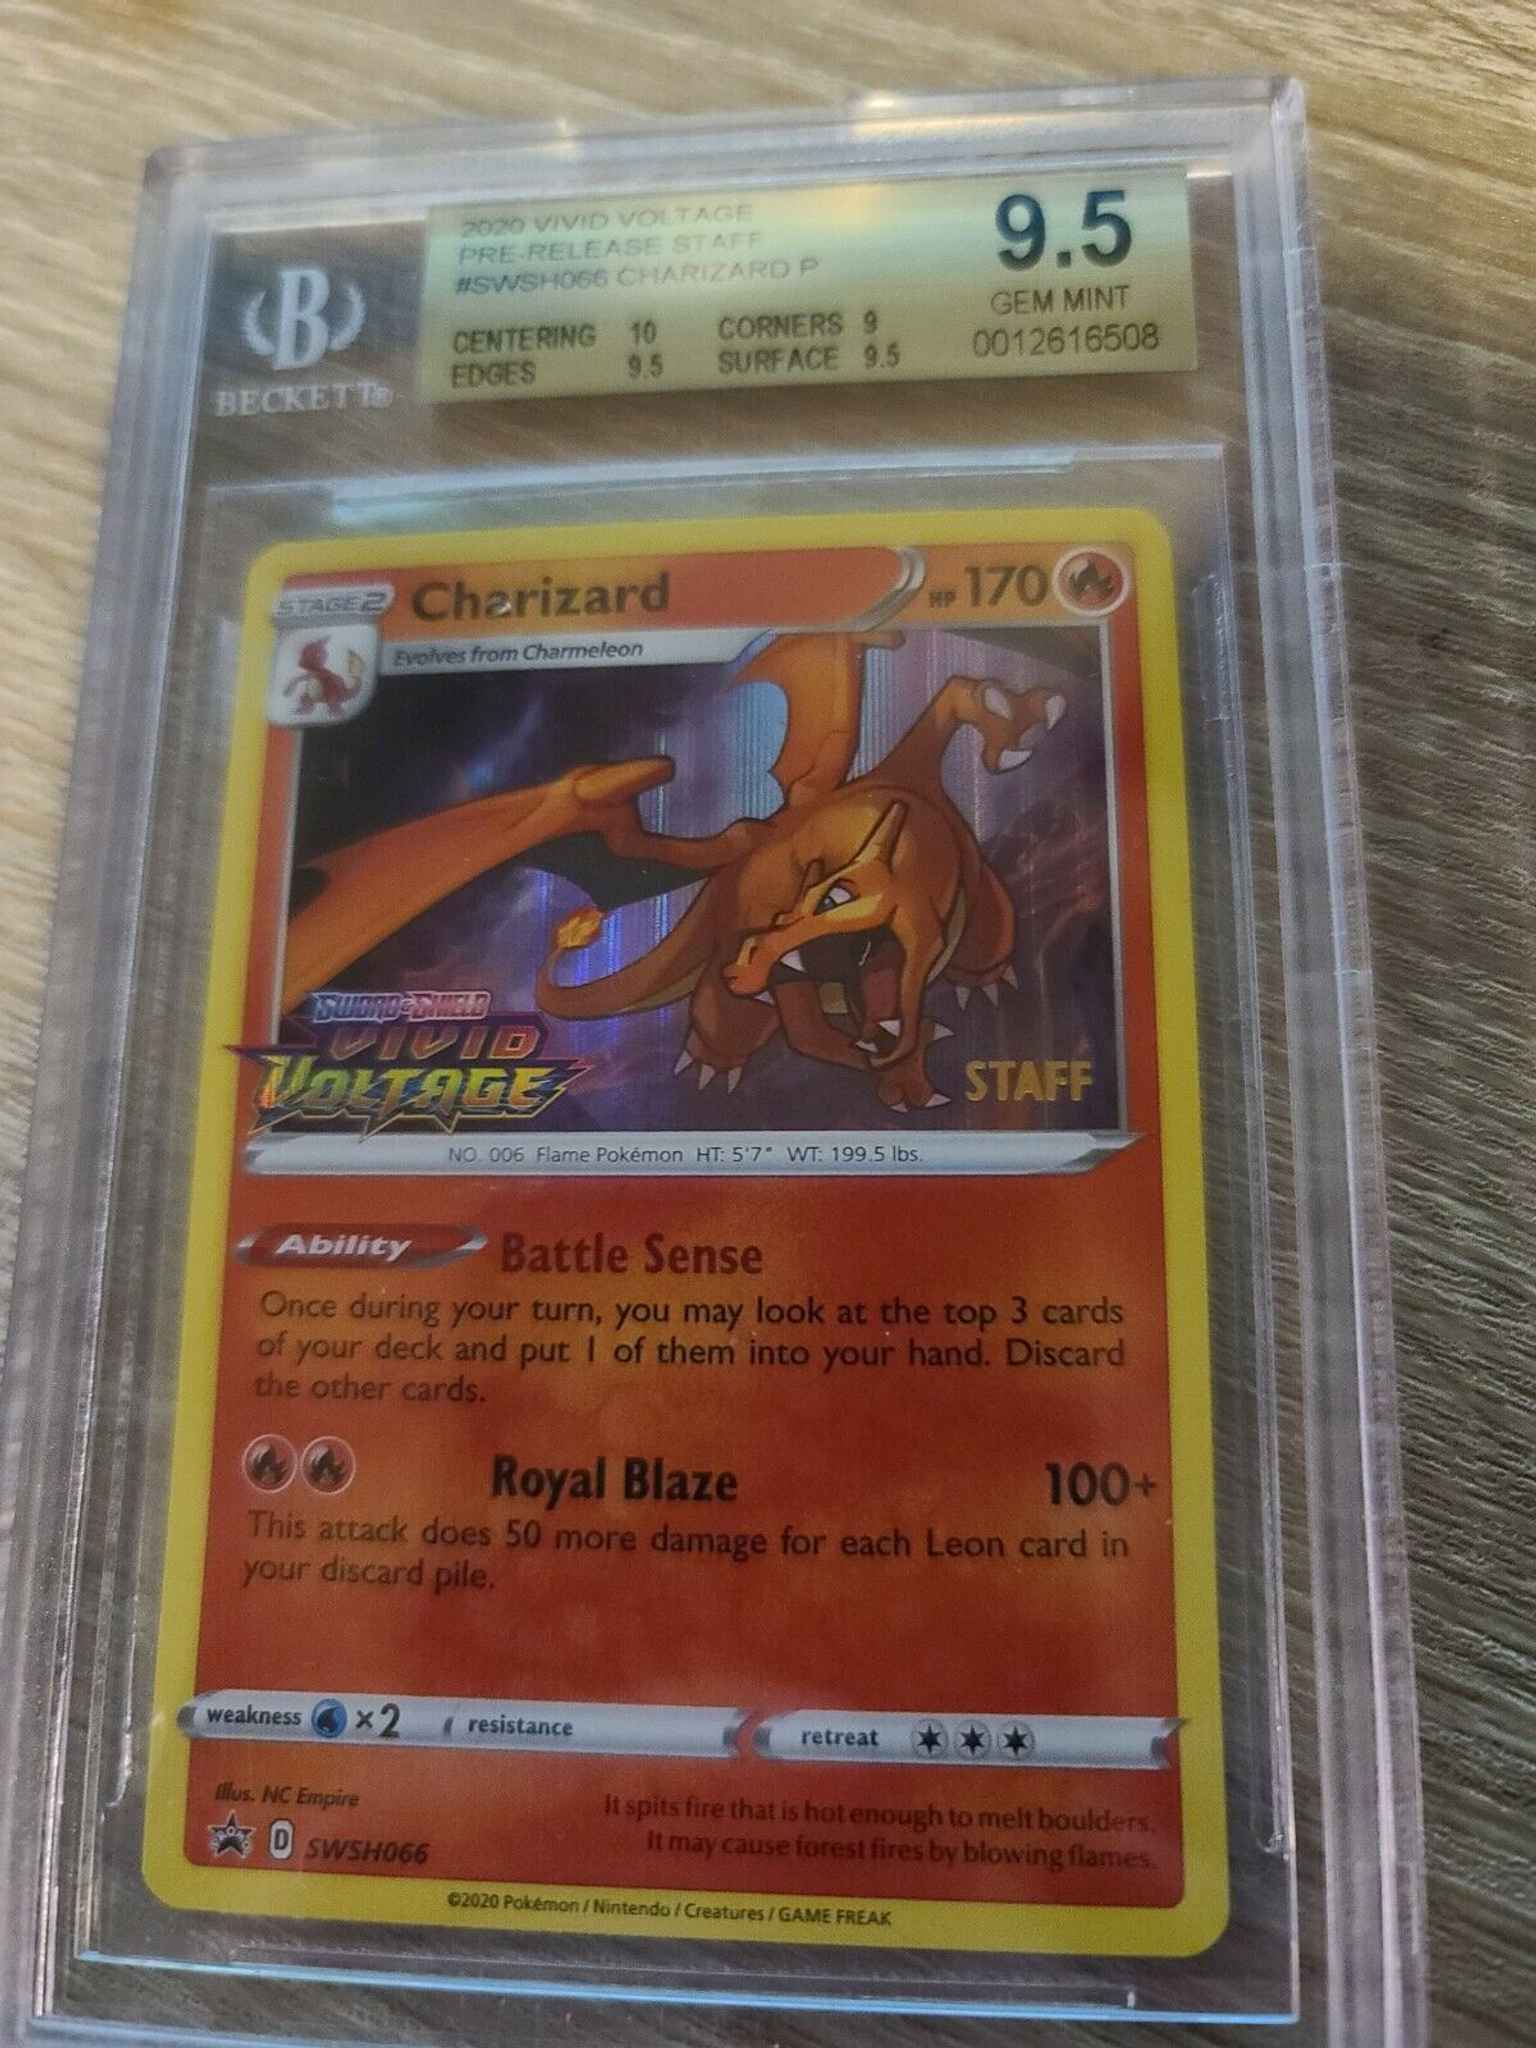 Bgs 9 5 Staff Vivid Voltage Charizard Promo Charizard Swsh066 Prerelease Promo Staff Swsh Sword Shield Promo Cards Pokemon Online Gaming Store For Cards Miniatures Singles Packs Booster Boxes